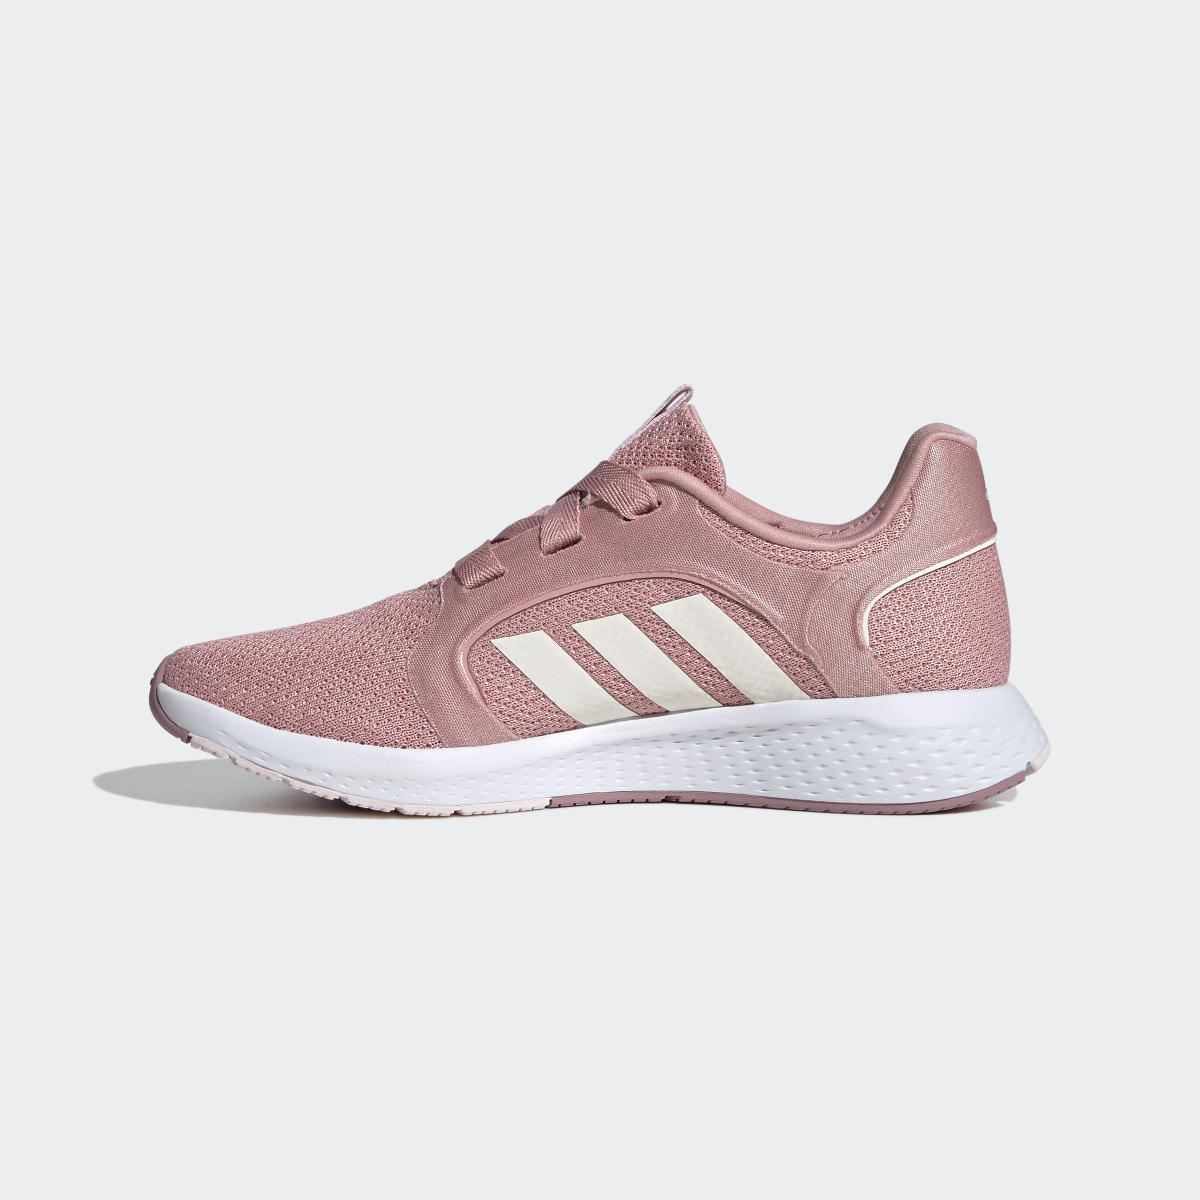 Adidas Edge Lux Shoes. 7